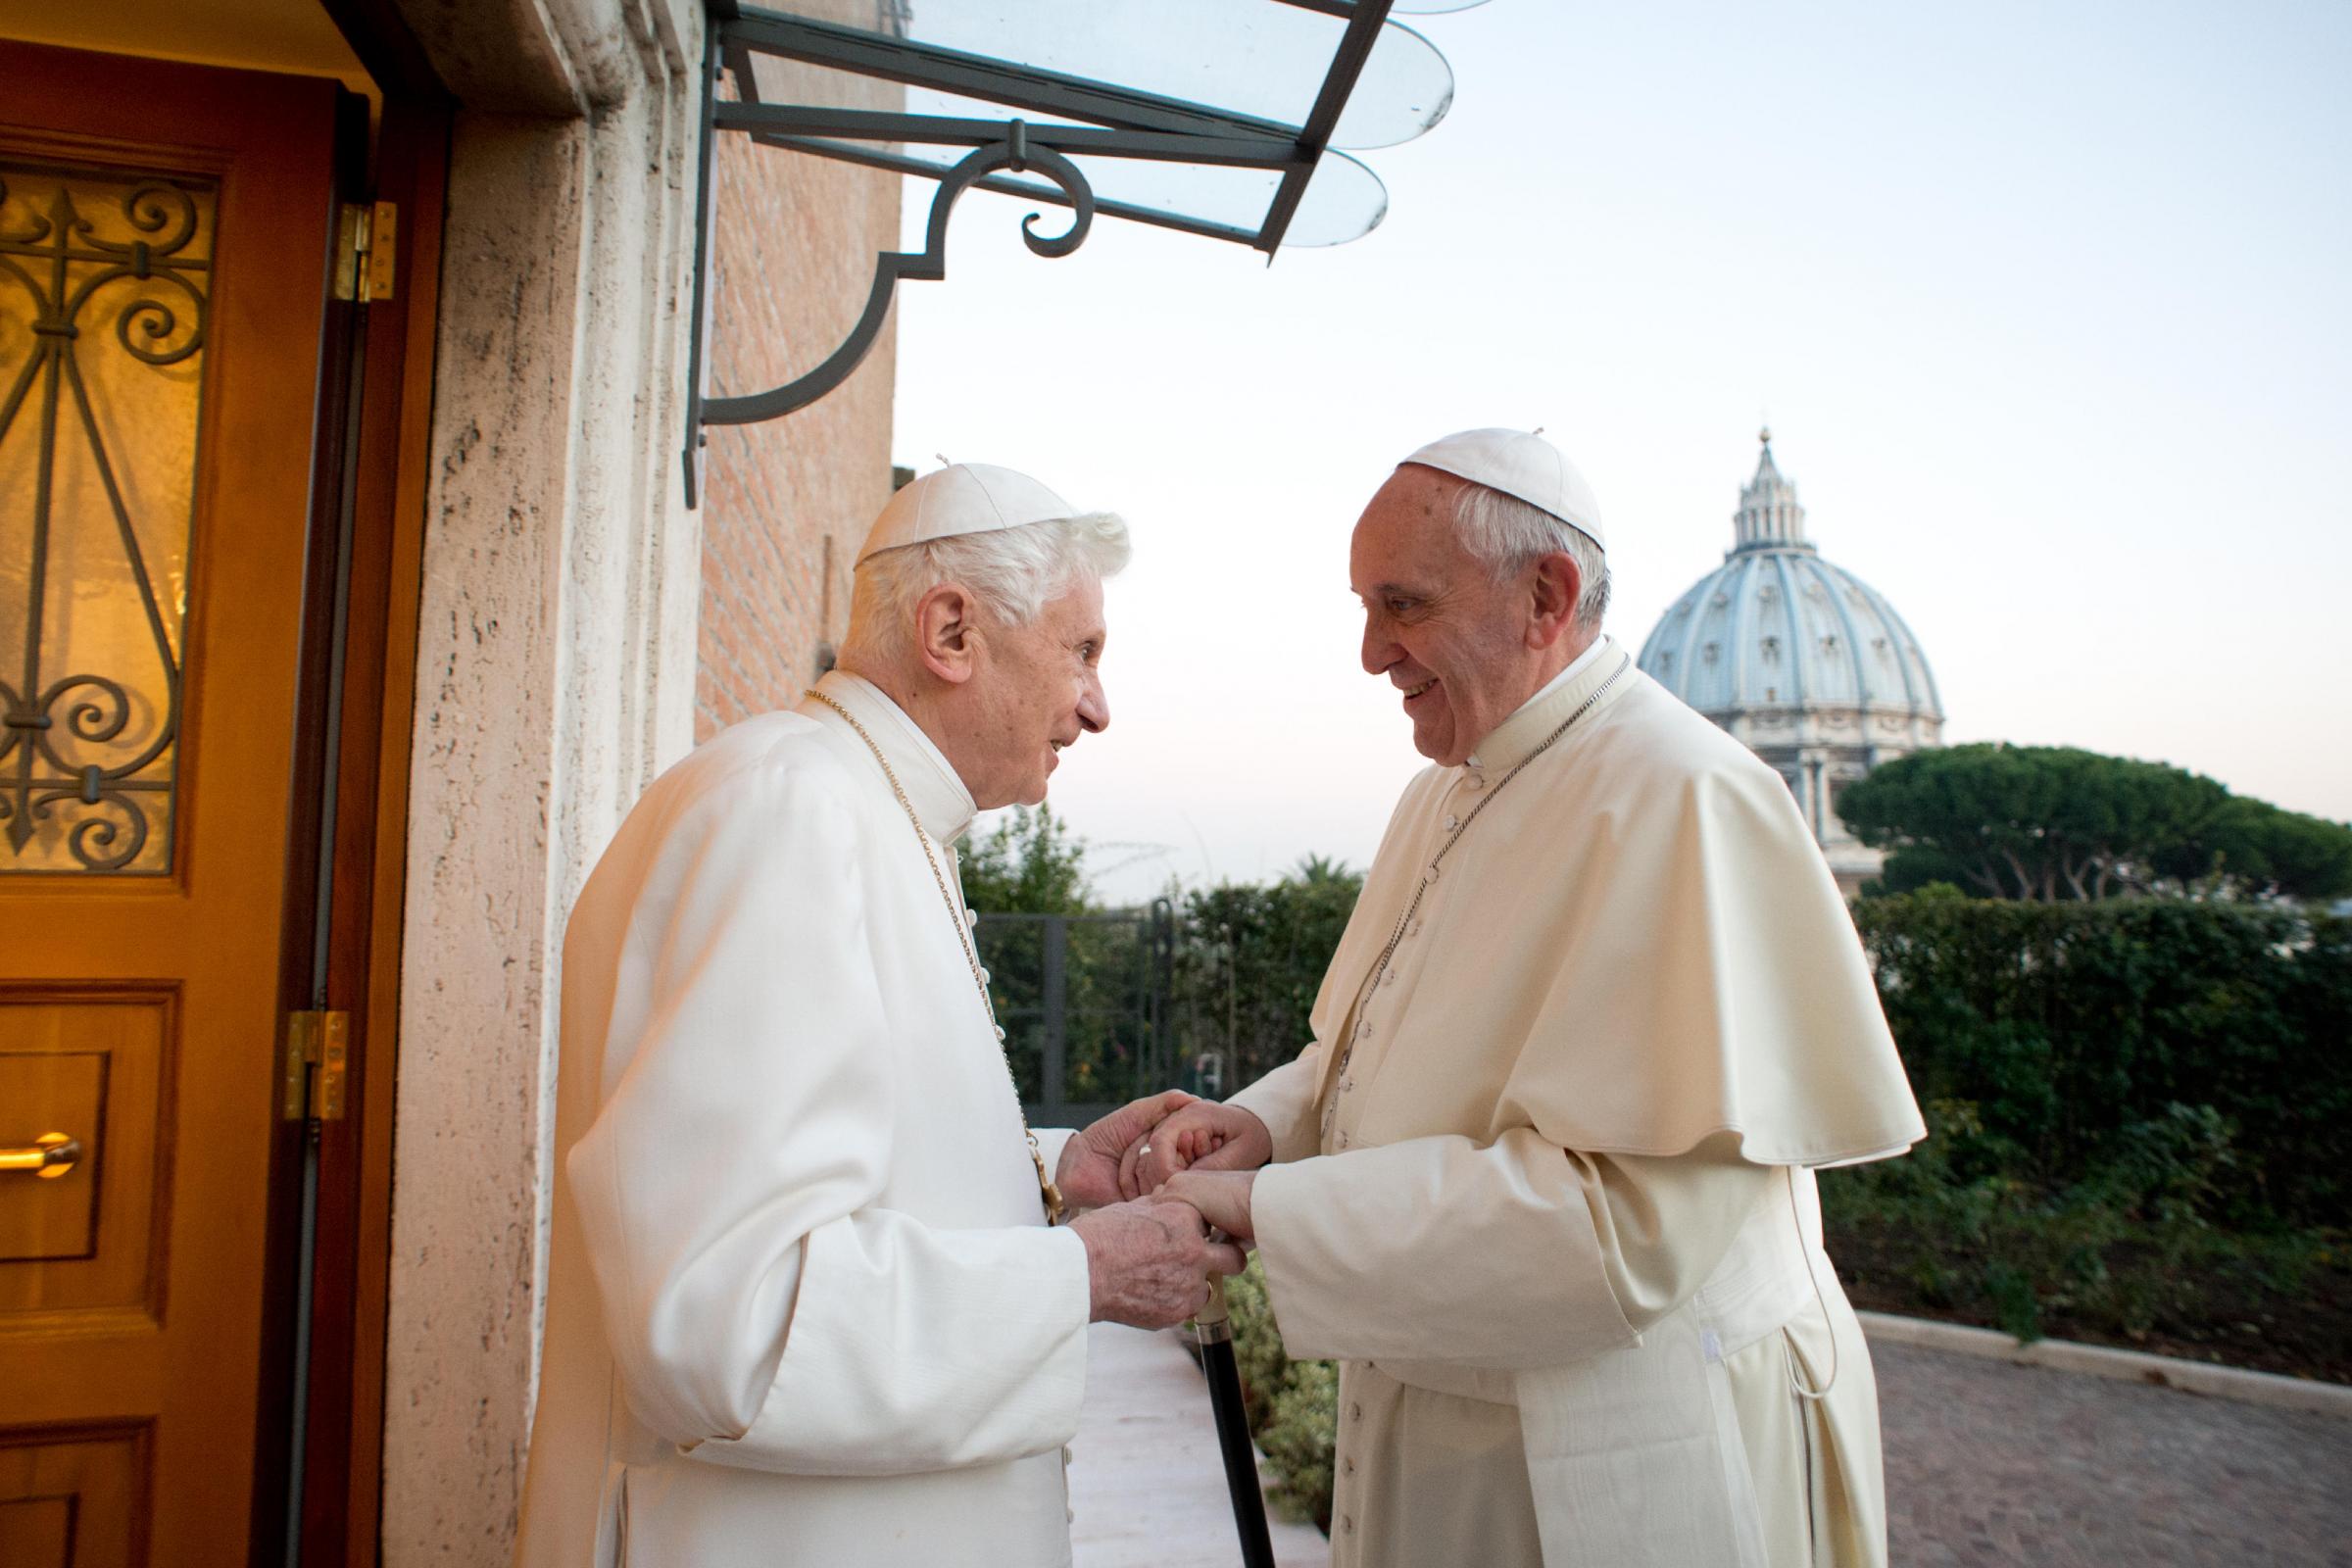 Vatican, Ratzinger's accusation: "Propaganda against me, they want to silence me"